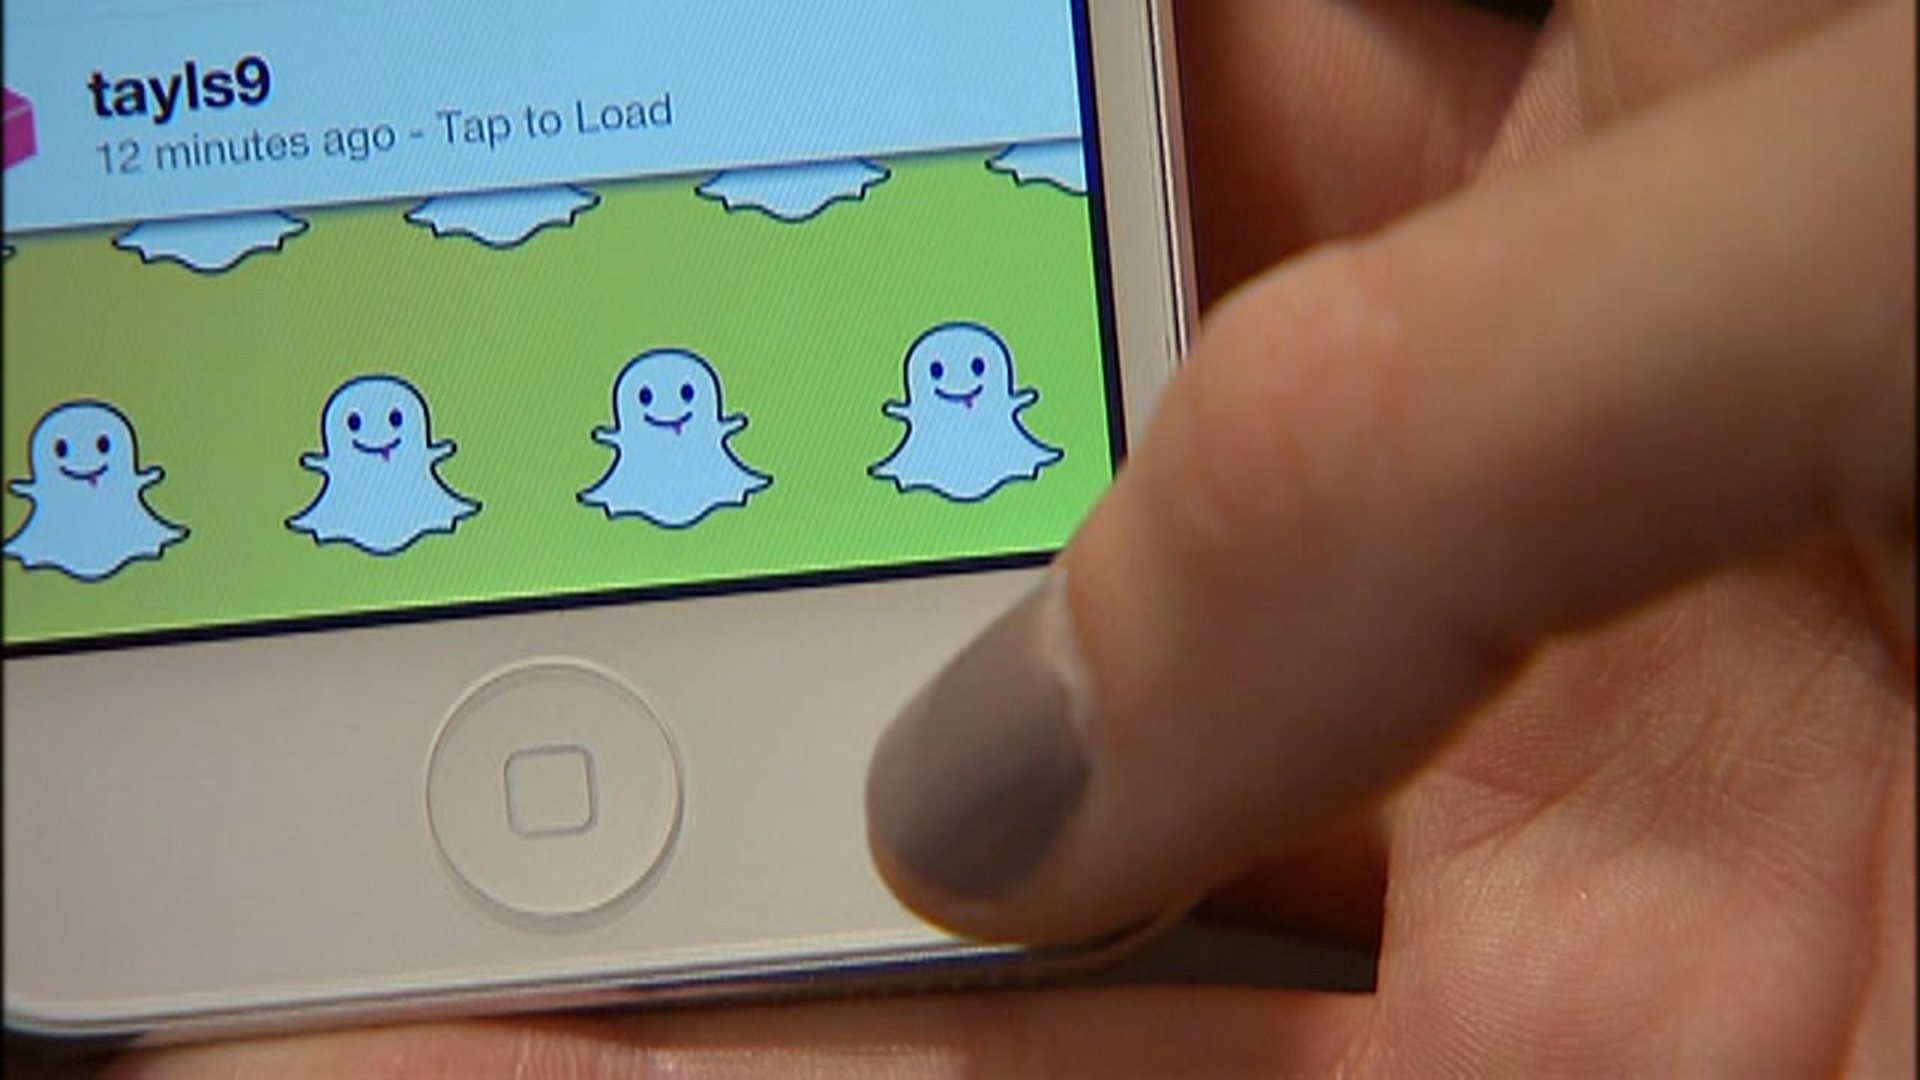 brenton hillman recommends sexting on snapchat pic